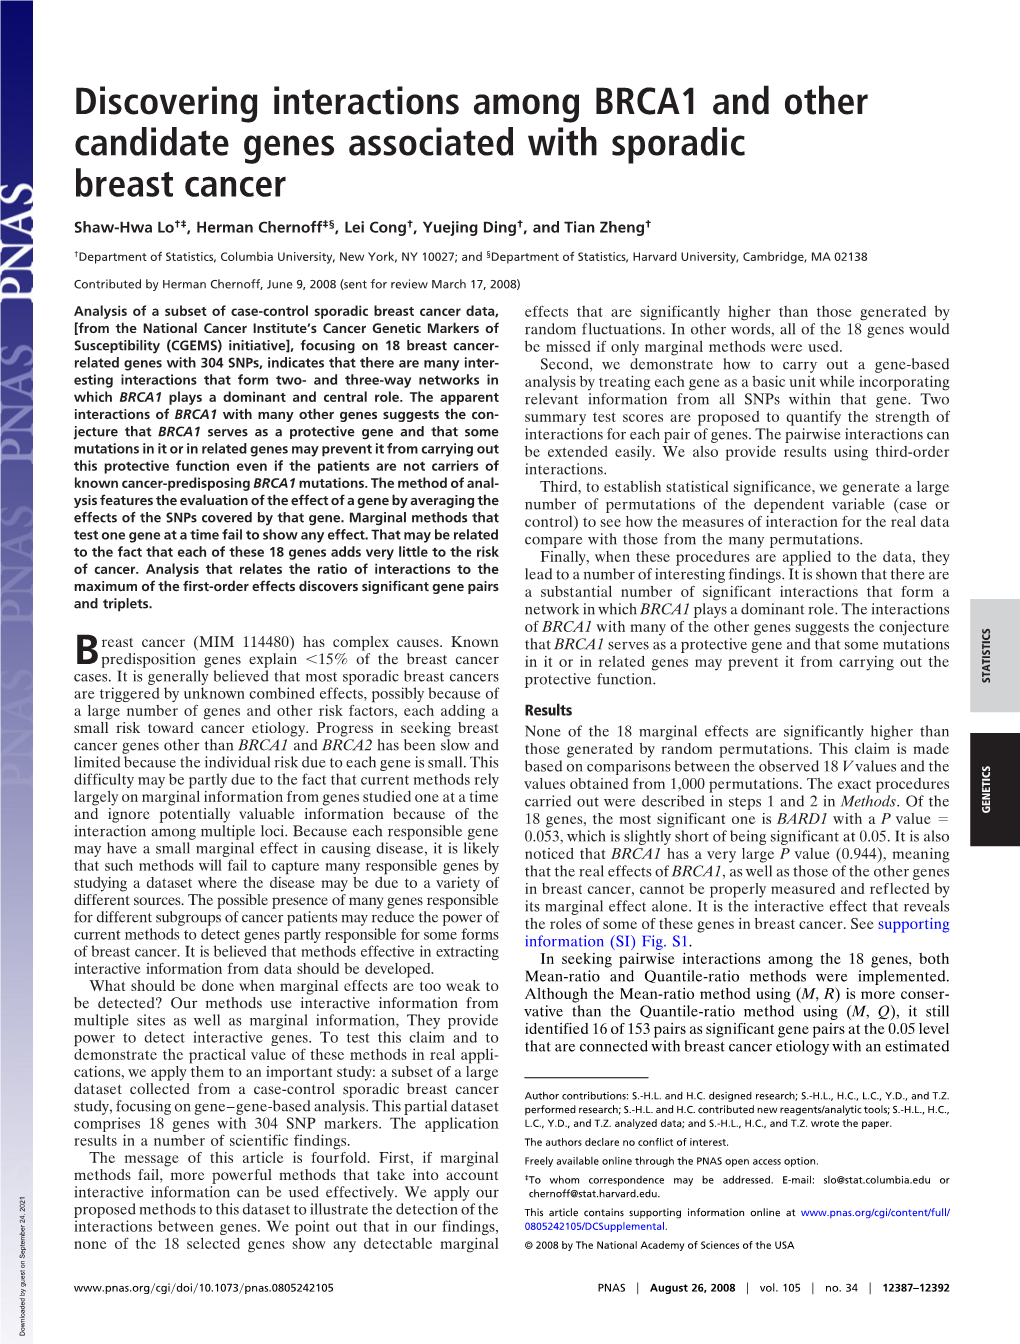 Discovering Interactions Among BRCA1 and Other Candidate Genes Associated with Sporadic Breast Cancer